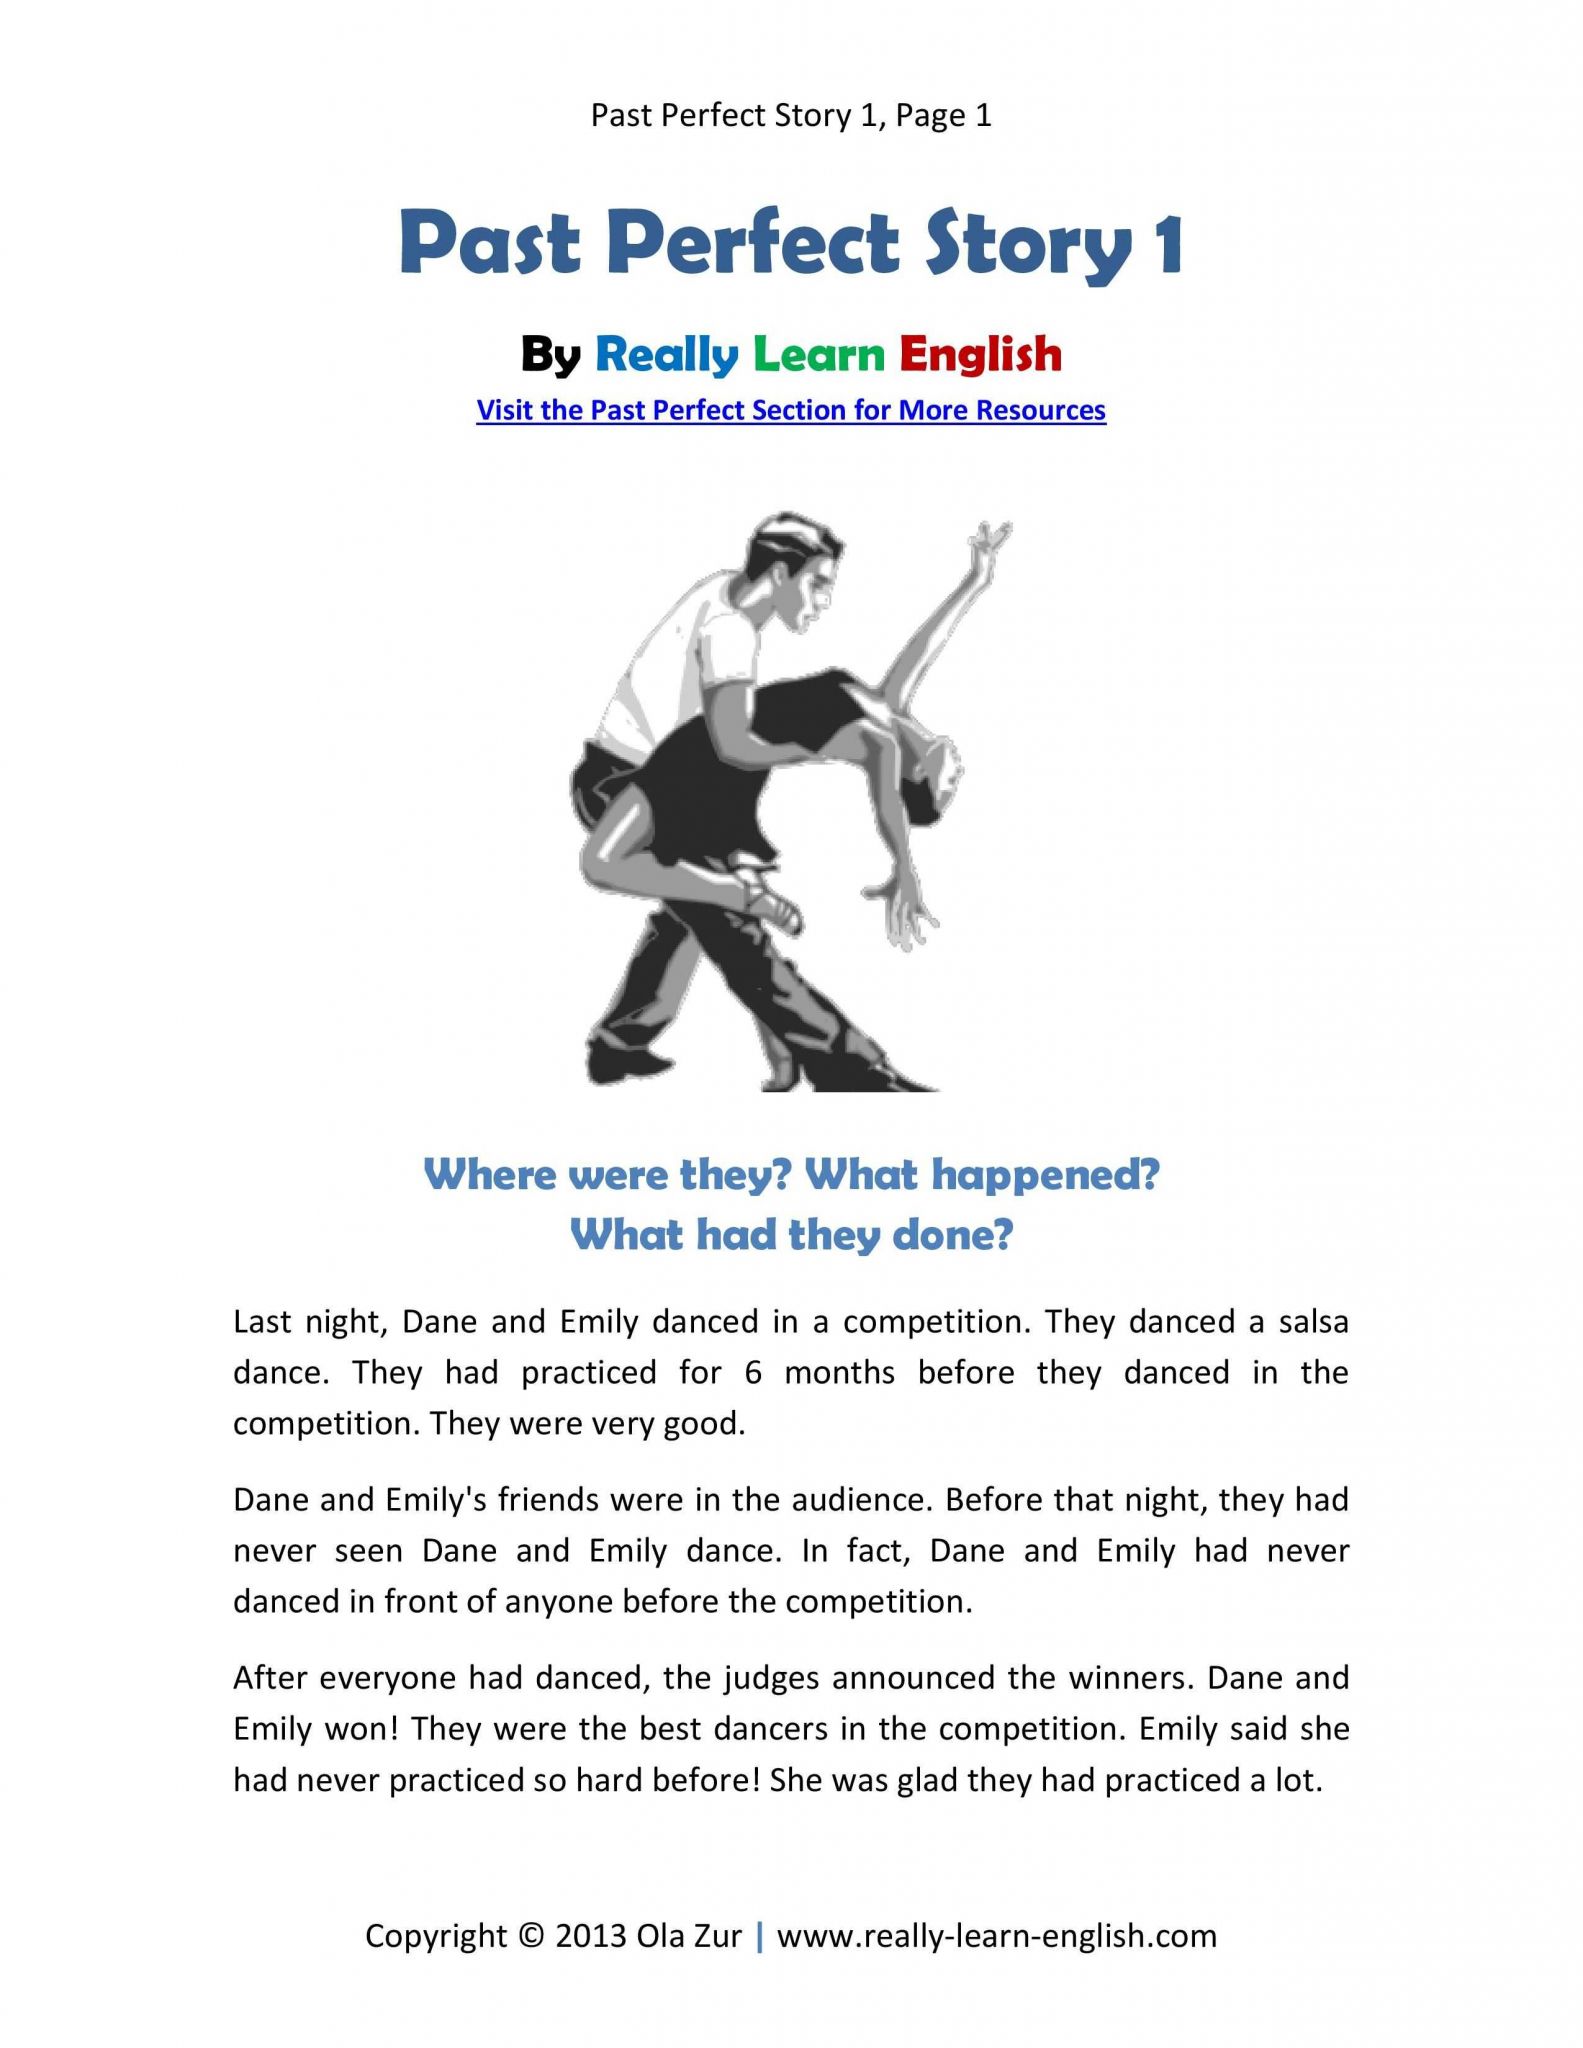 Idioms Worksheets Pdf Also Free Printable Story and Exercises for the English Past Perfect